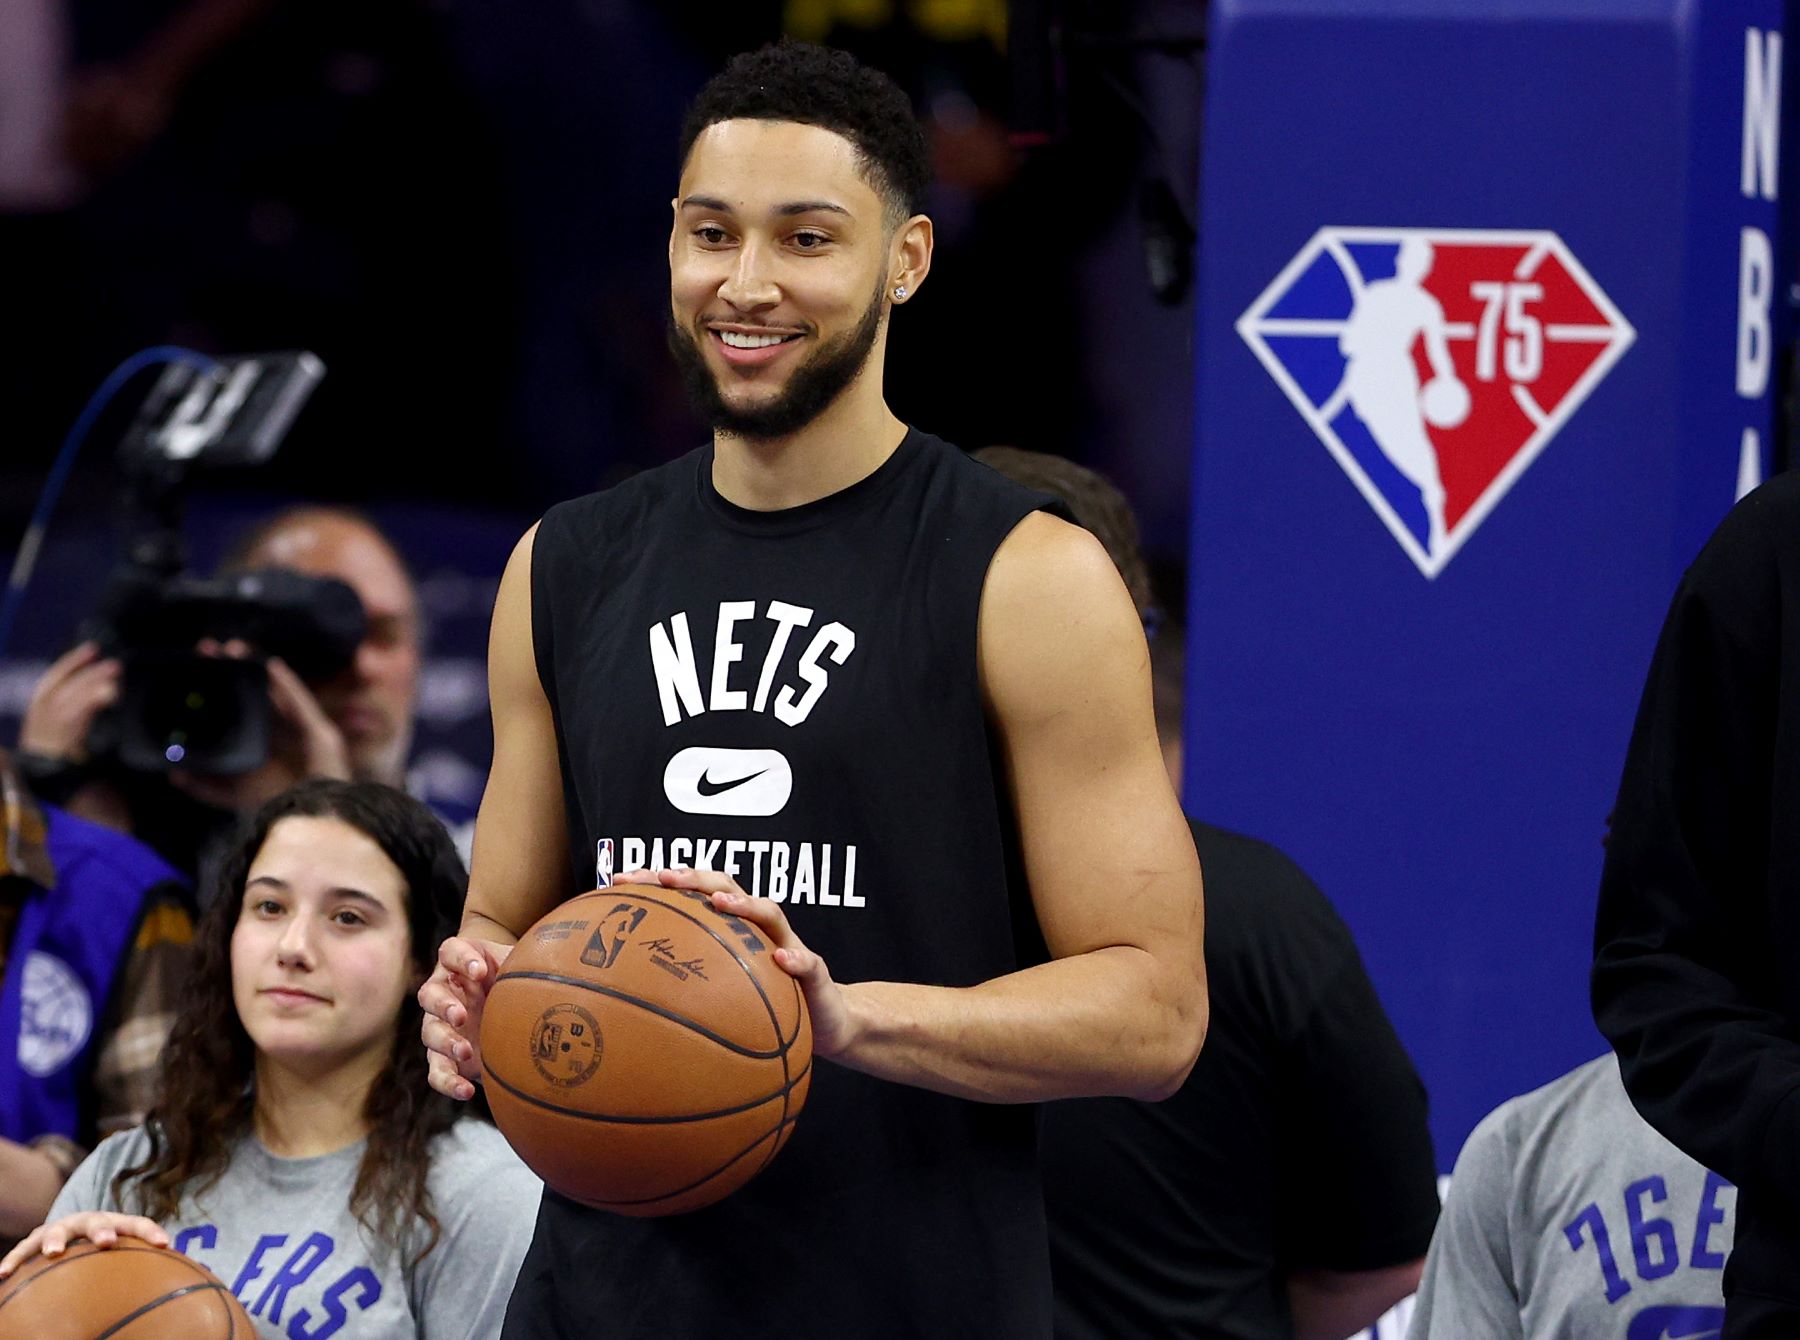 Ben Simmons #10 of the Brooklyn Nets NBA team warming up before a game against the Philadelphia 76ers